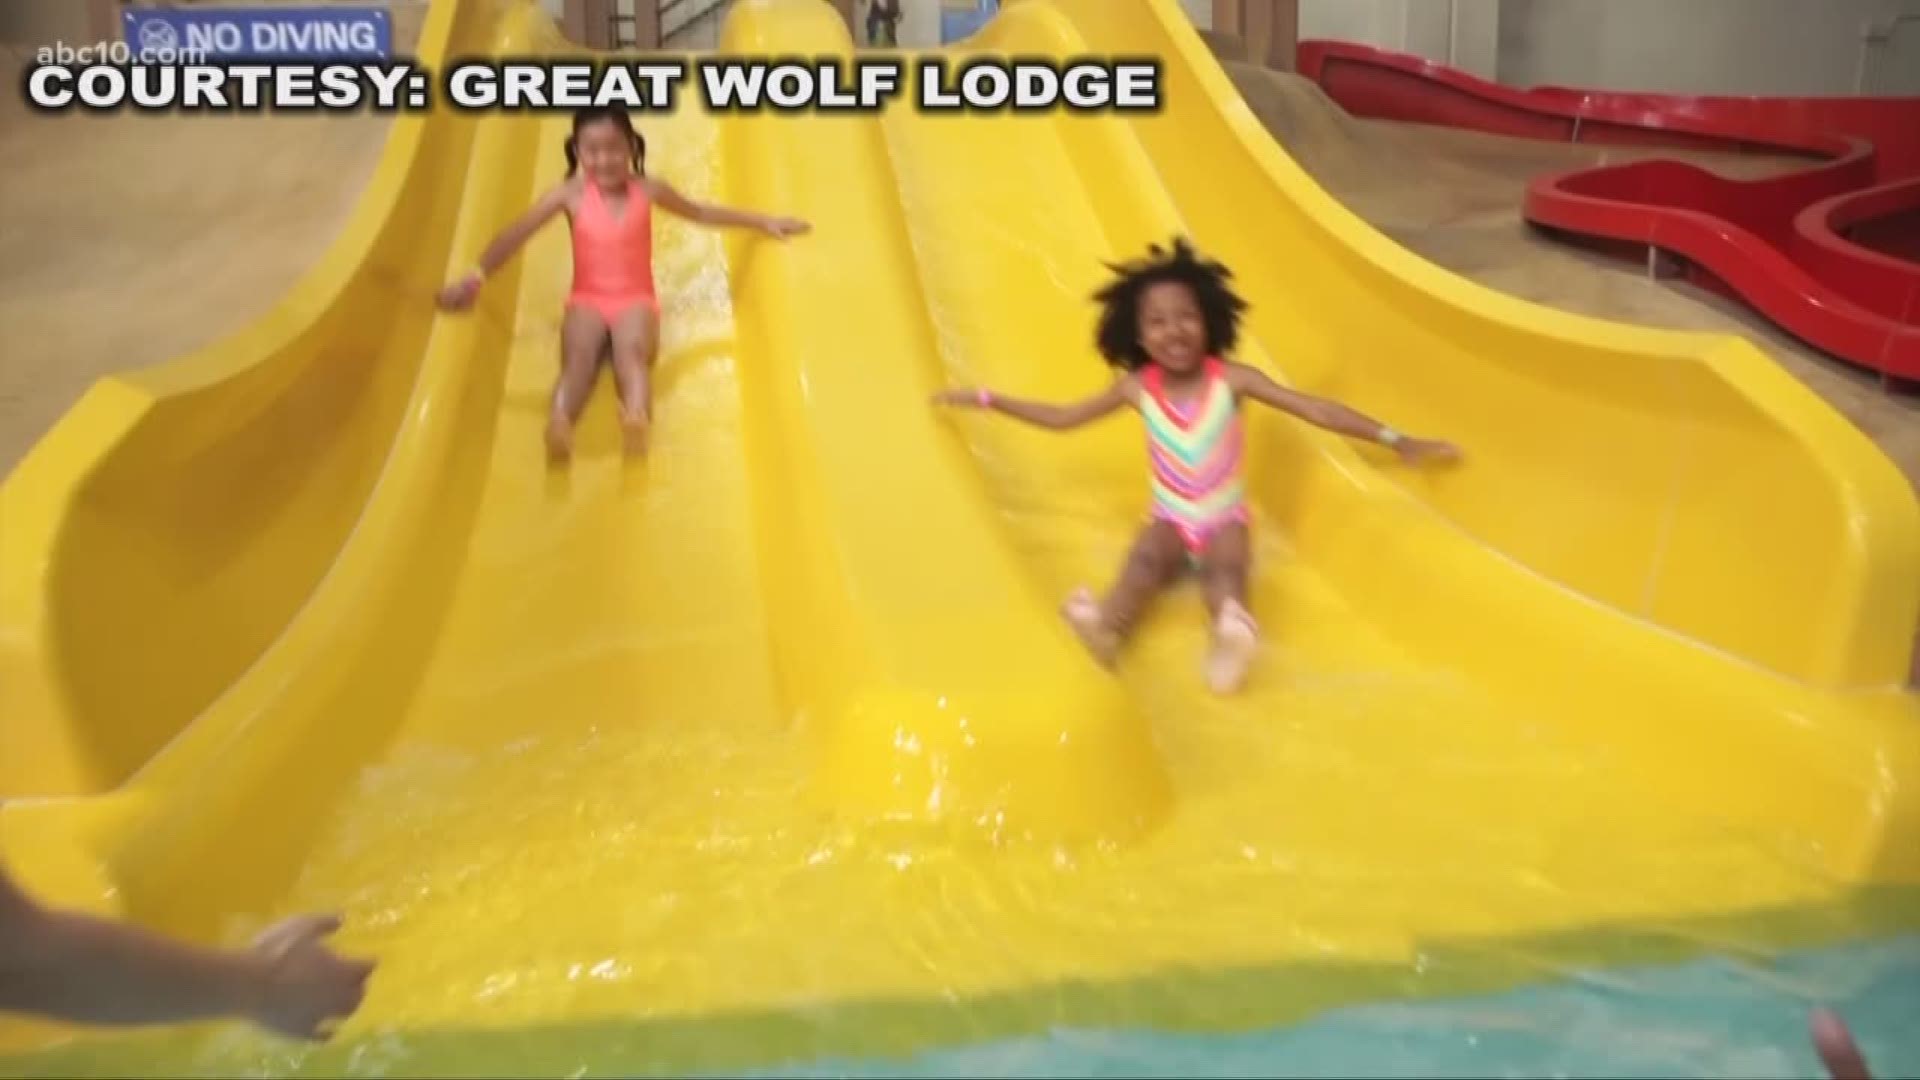 Manteca will soon break ground on a new multi-million dollar water park. It's called the Great Wolf Lodge.